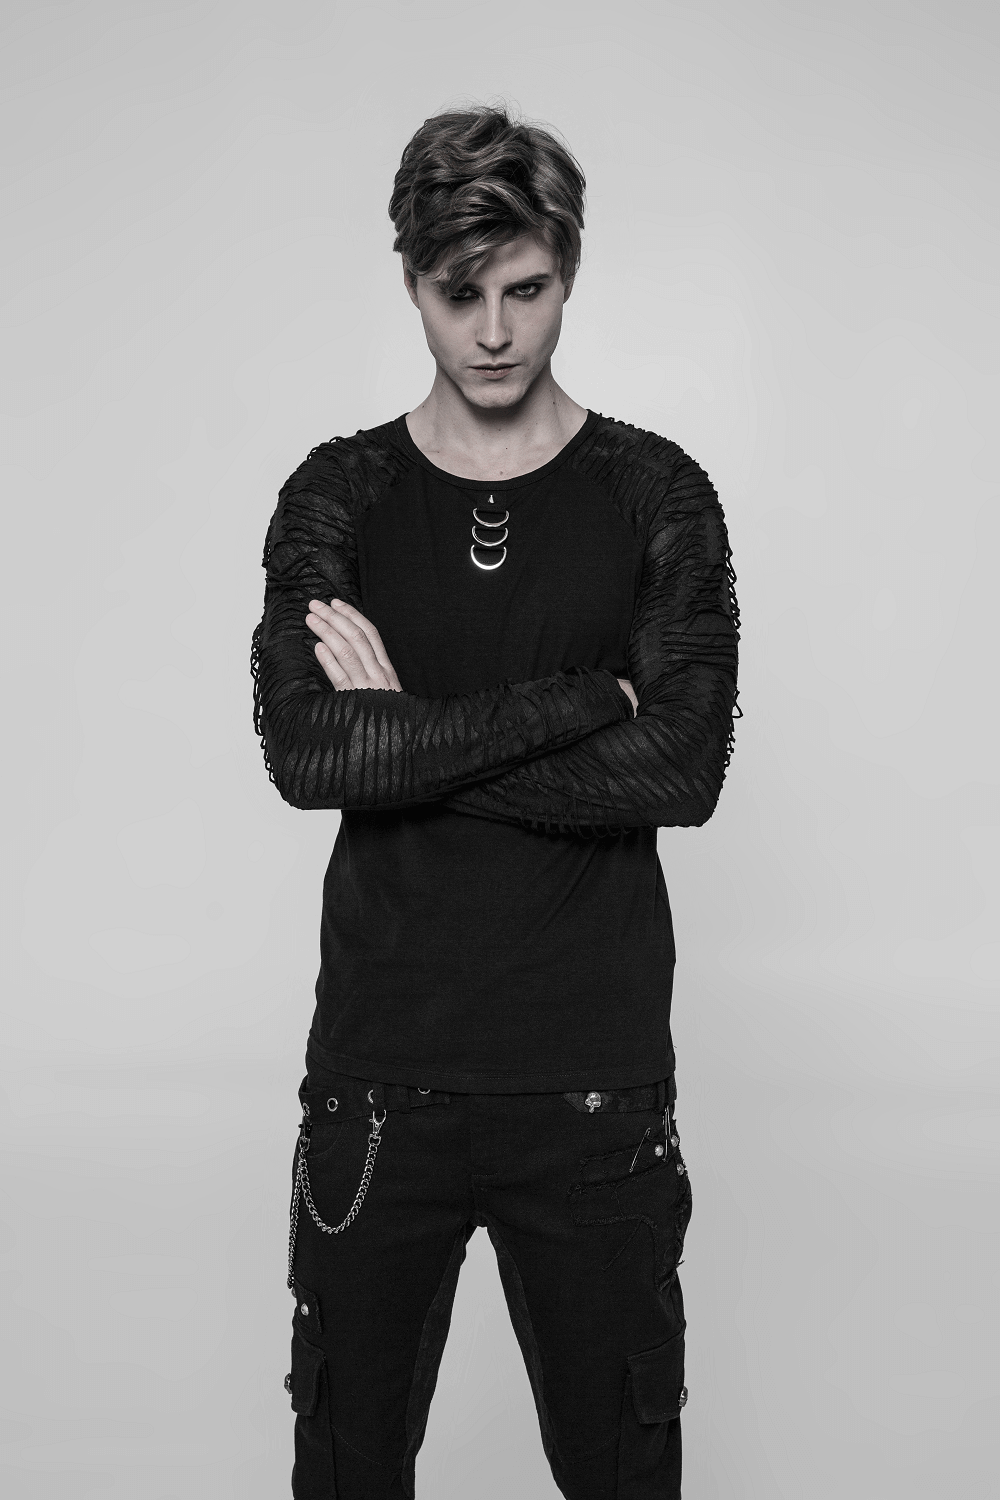 Black Sweatshirt with Ripped Knit Details on the Sleeves for Men